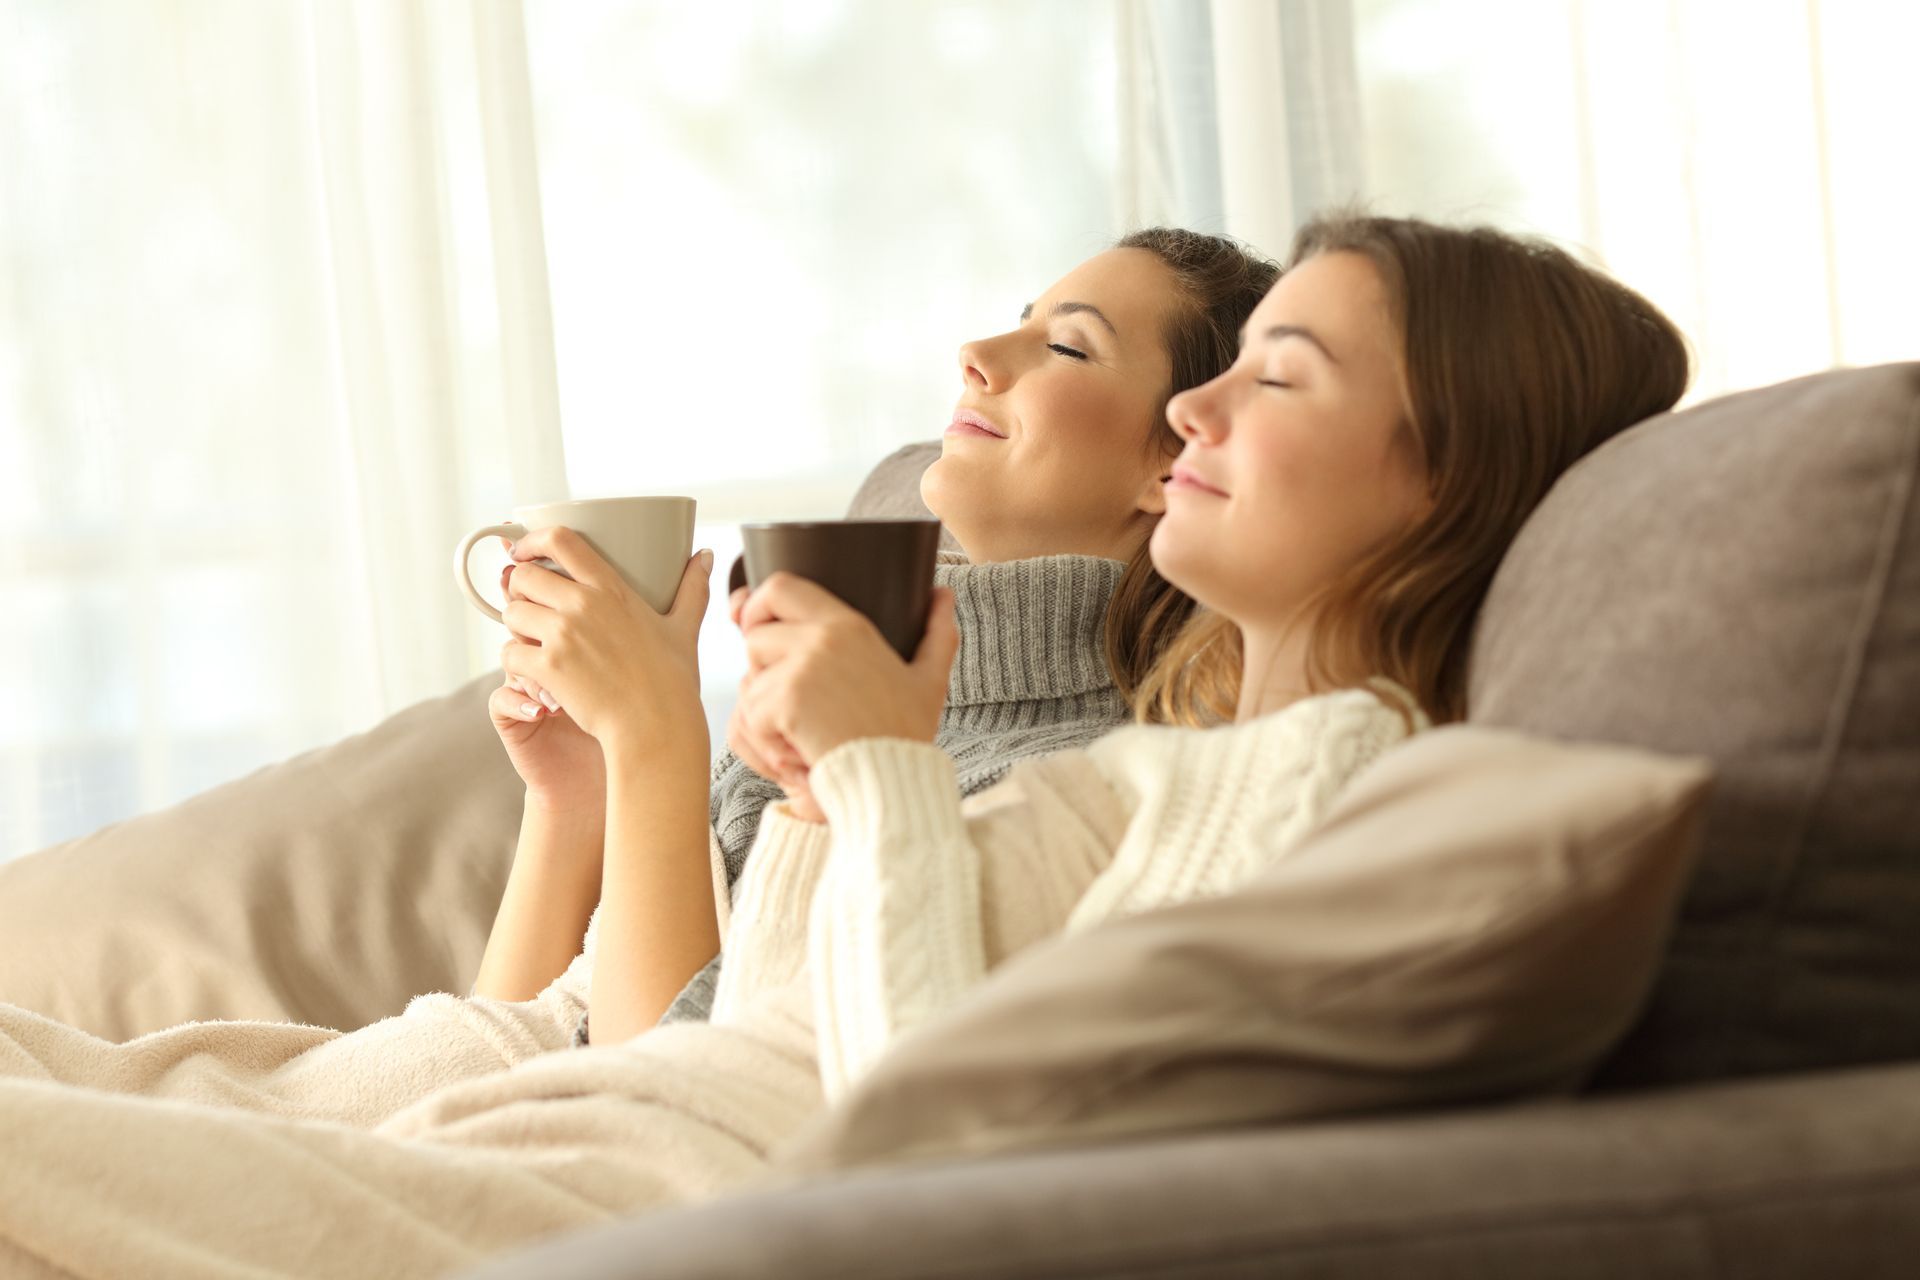 two women sit on a couch holding cups of coffee